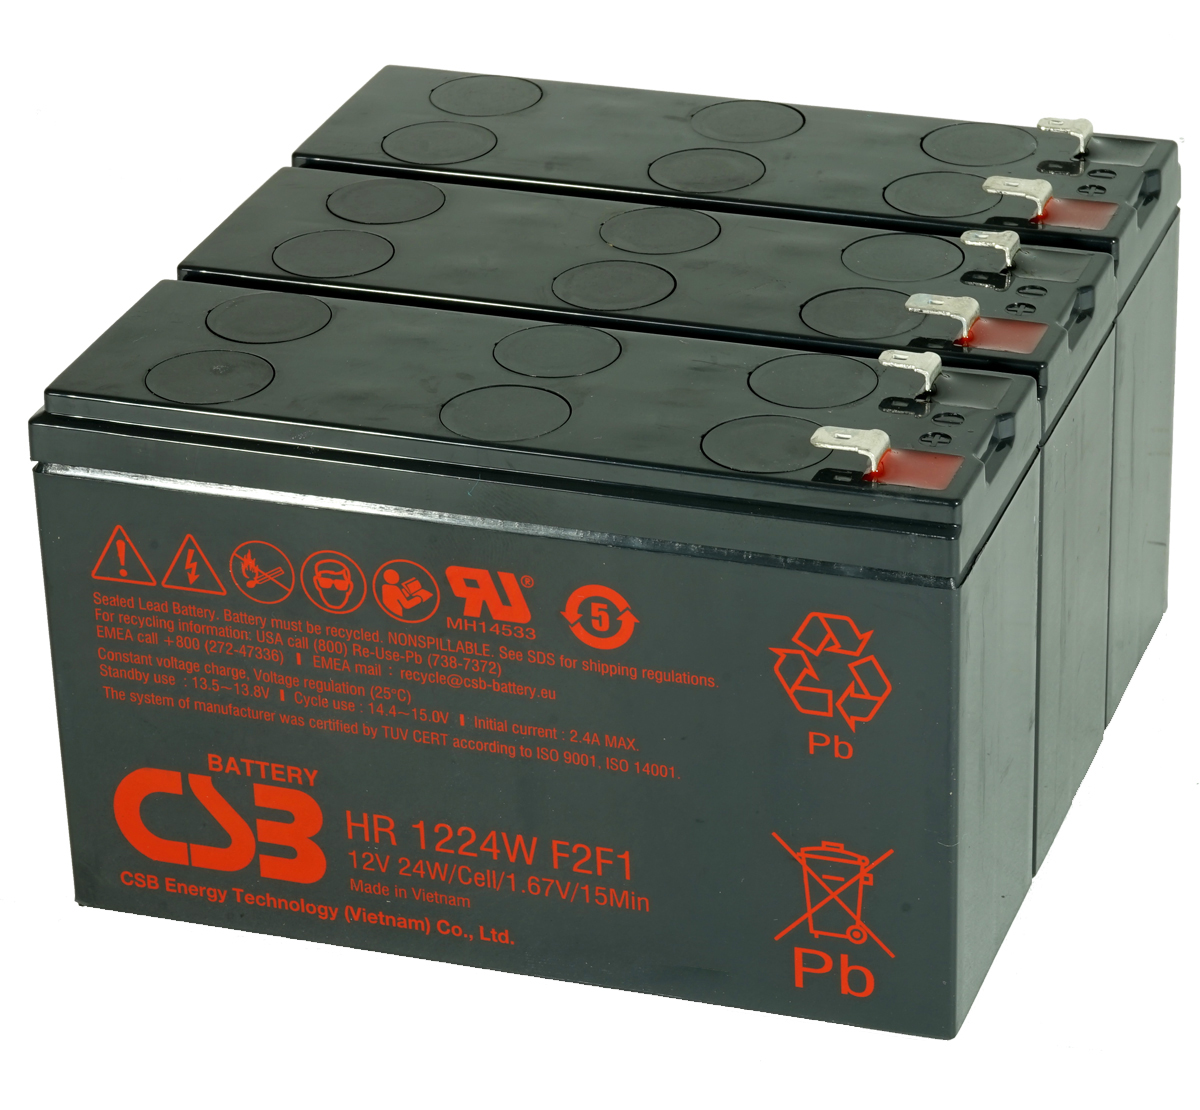 MDS1014 UPS Battery Kit for MGE AB1014